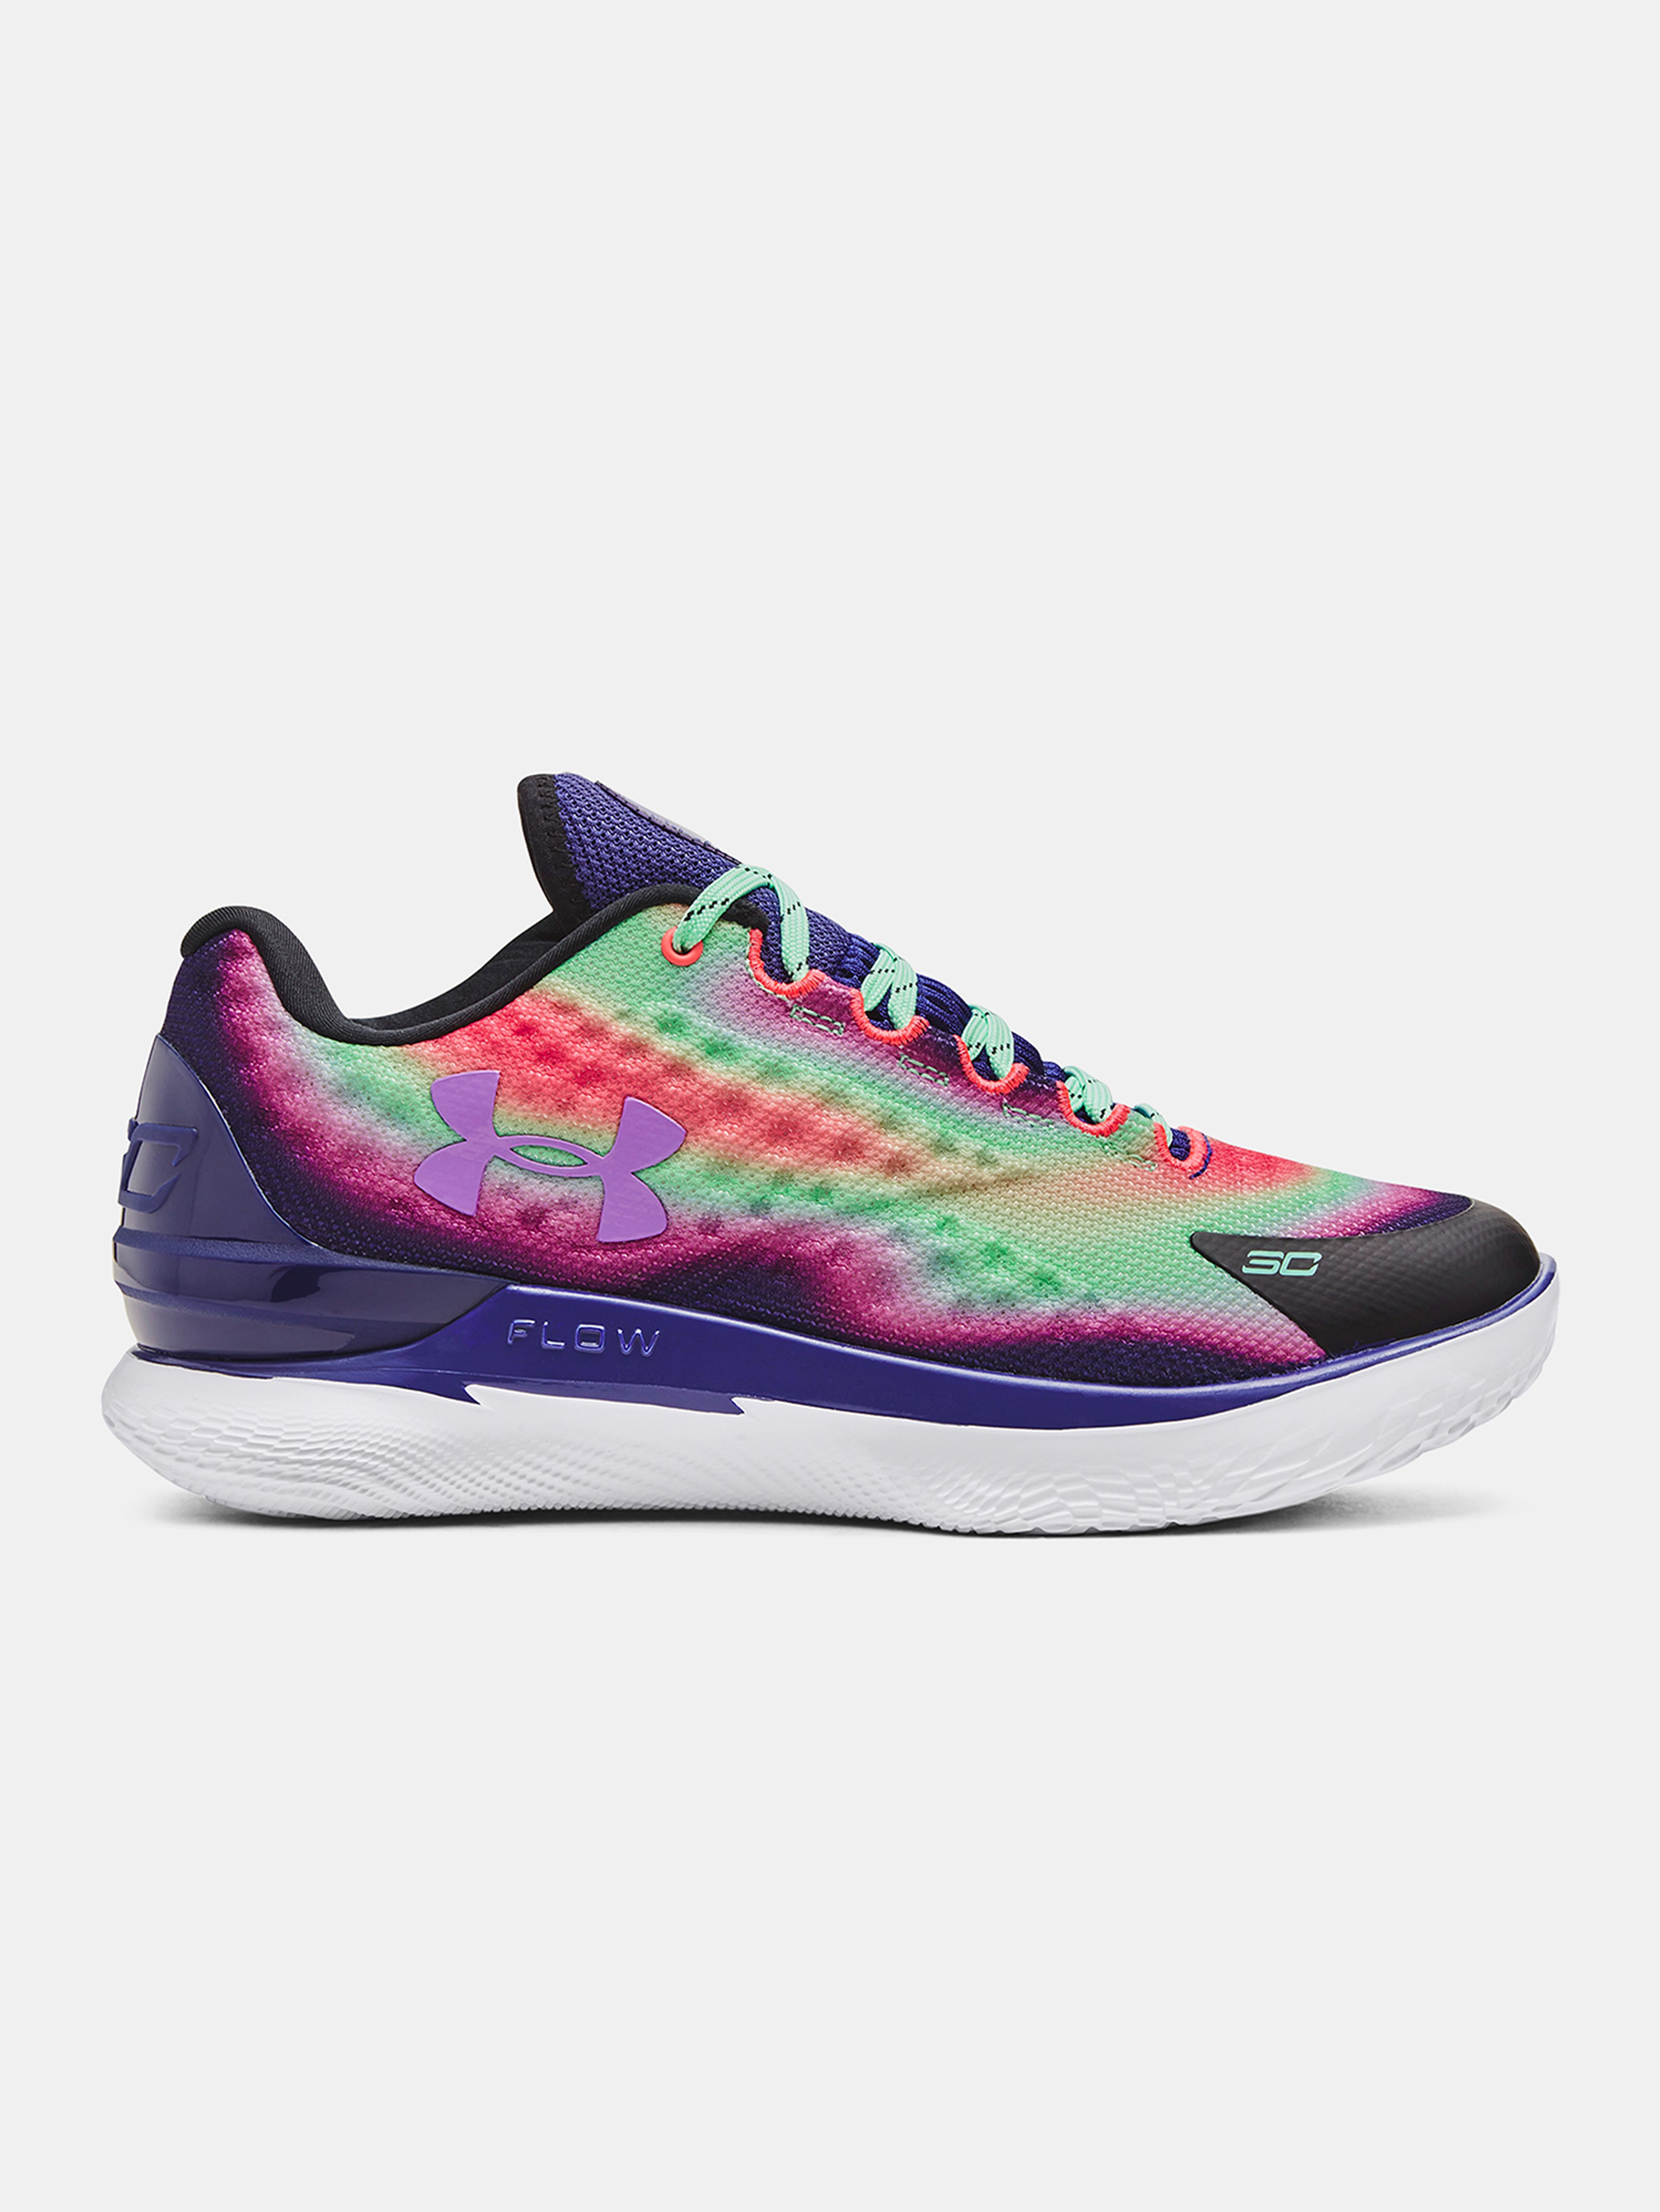 Boty Under Armour CURRY 1 LOW FLOTRO NM-BLK